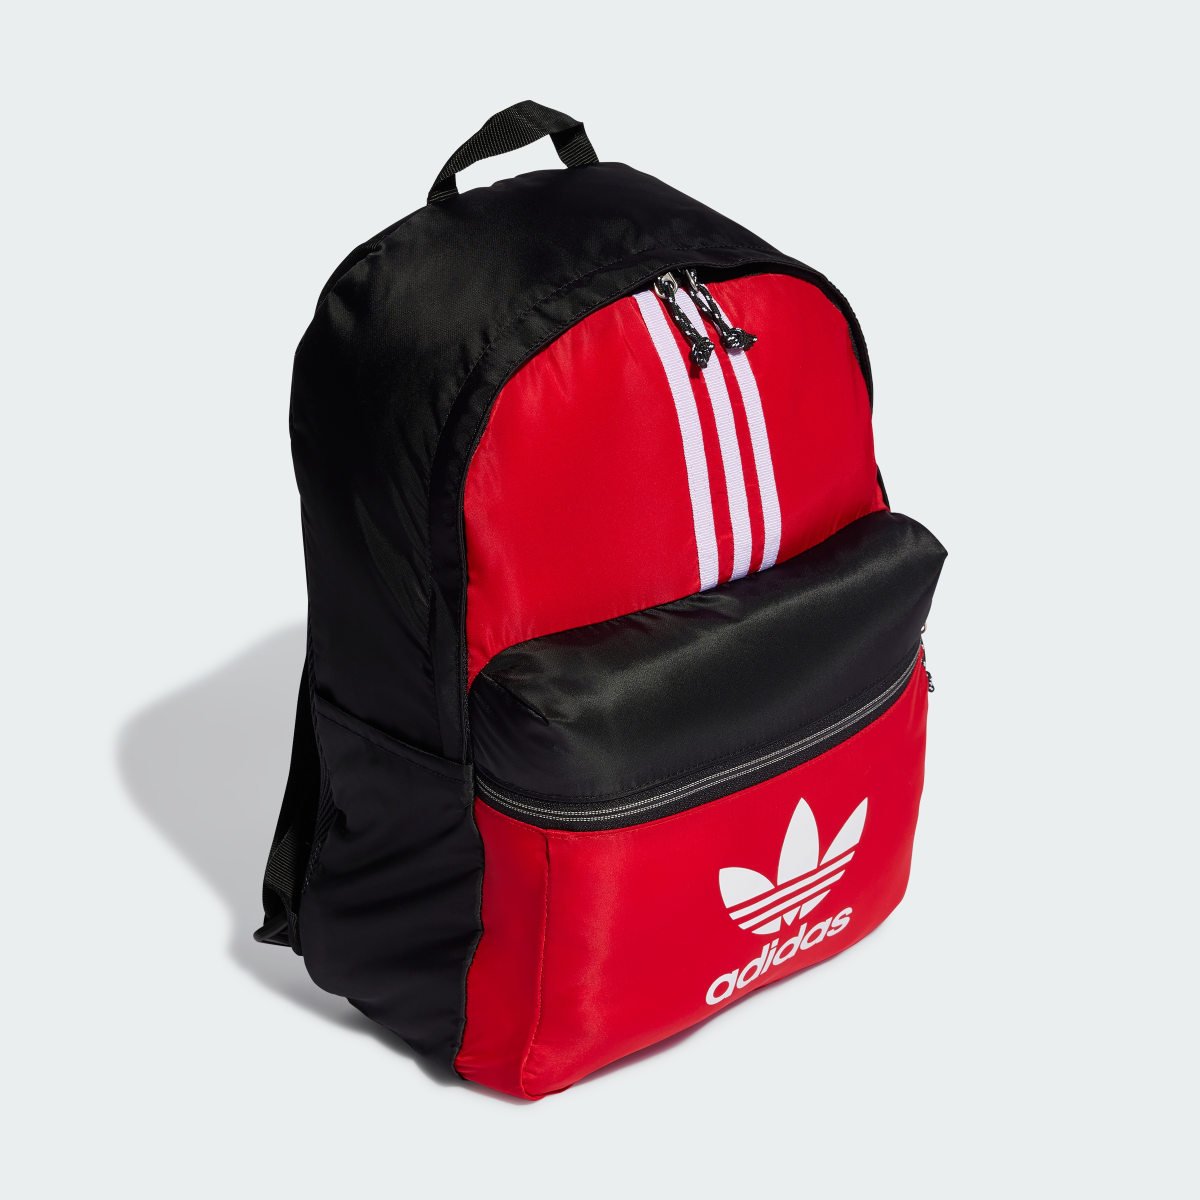 Adidas Adicolor Archive Backpack. 4